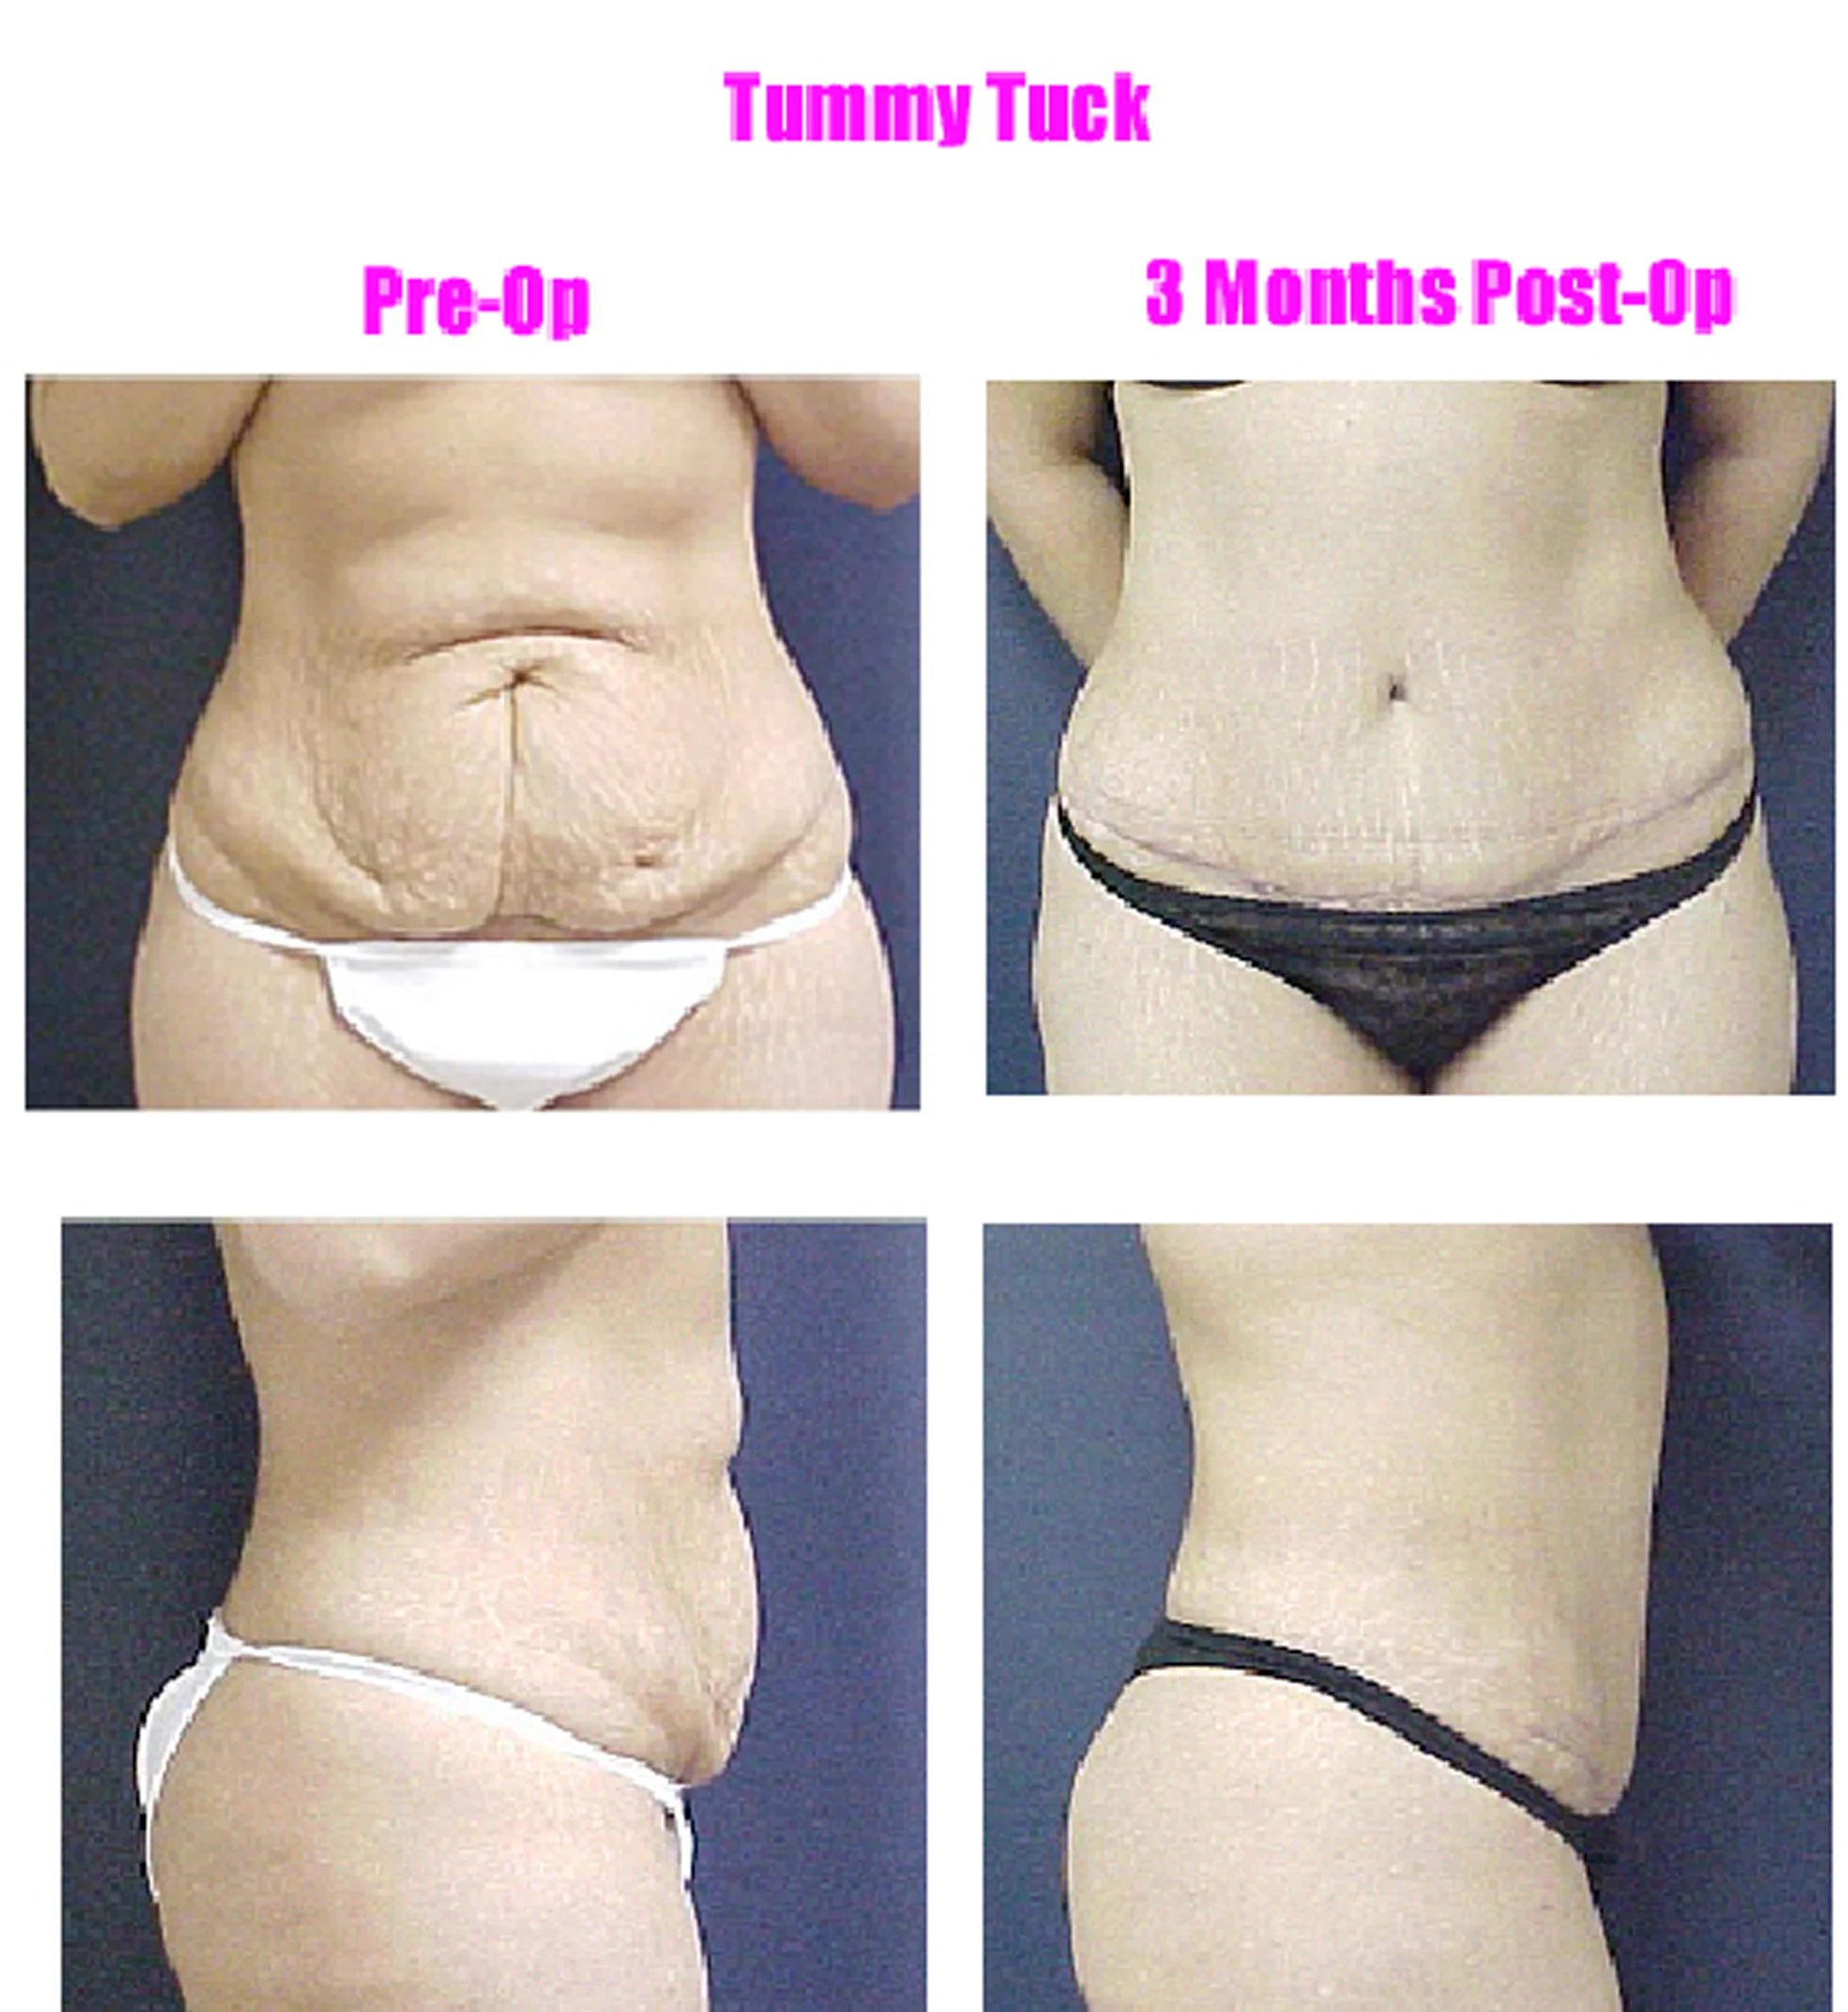 My Experience With Liposuction and a Tummy Tuck as a Patient With